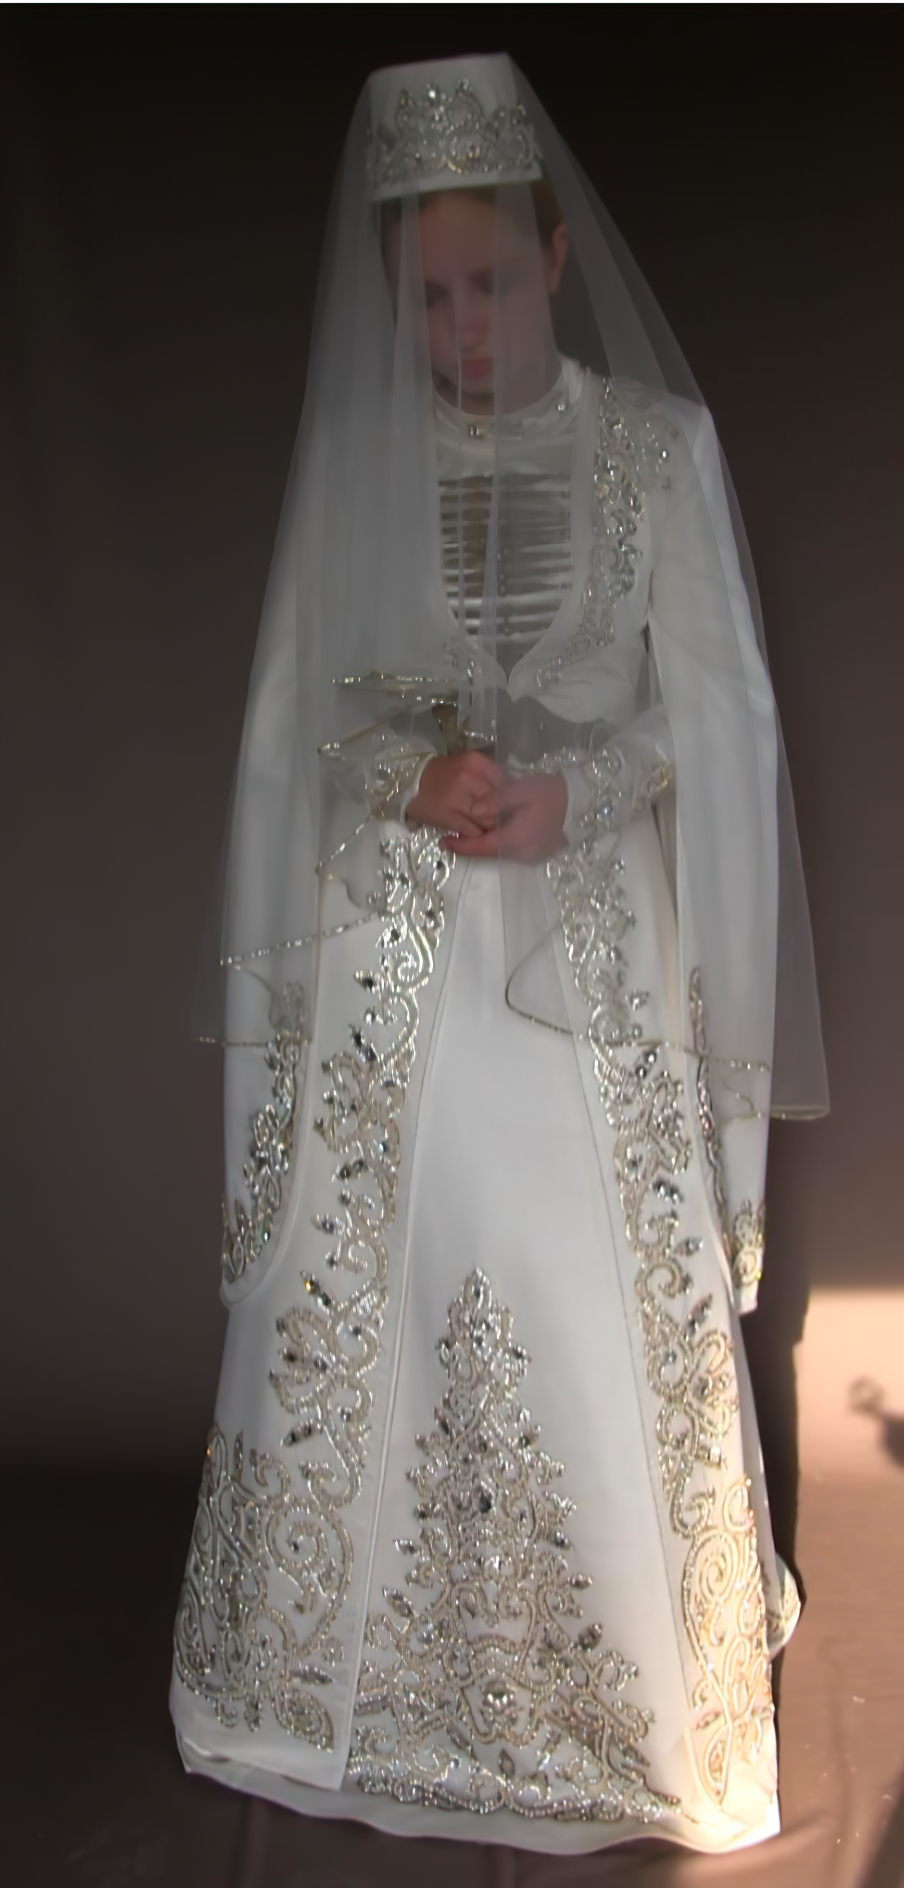 From the performance 6/8, 2016. The work is based on a wedding tradition shared by Ossetians and Chechens, which sees the bride silently stand in the corner for up to 10 hours during her own wedding, as a sign of respect to the groom’s family